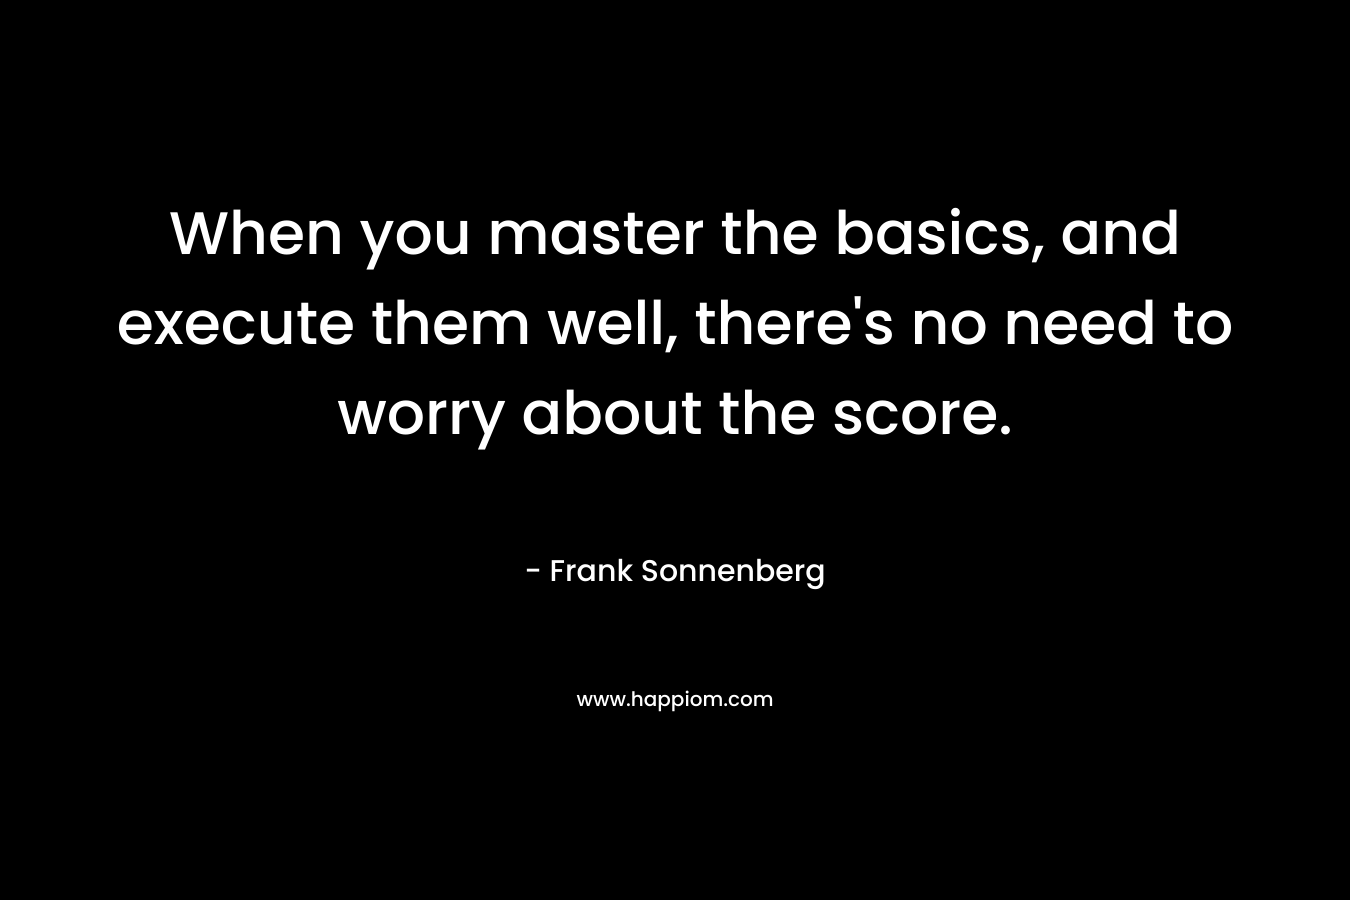 When you master the basics, and execute them well, there’s no need to worry about the score. – Frank Sonnenberg